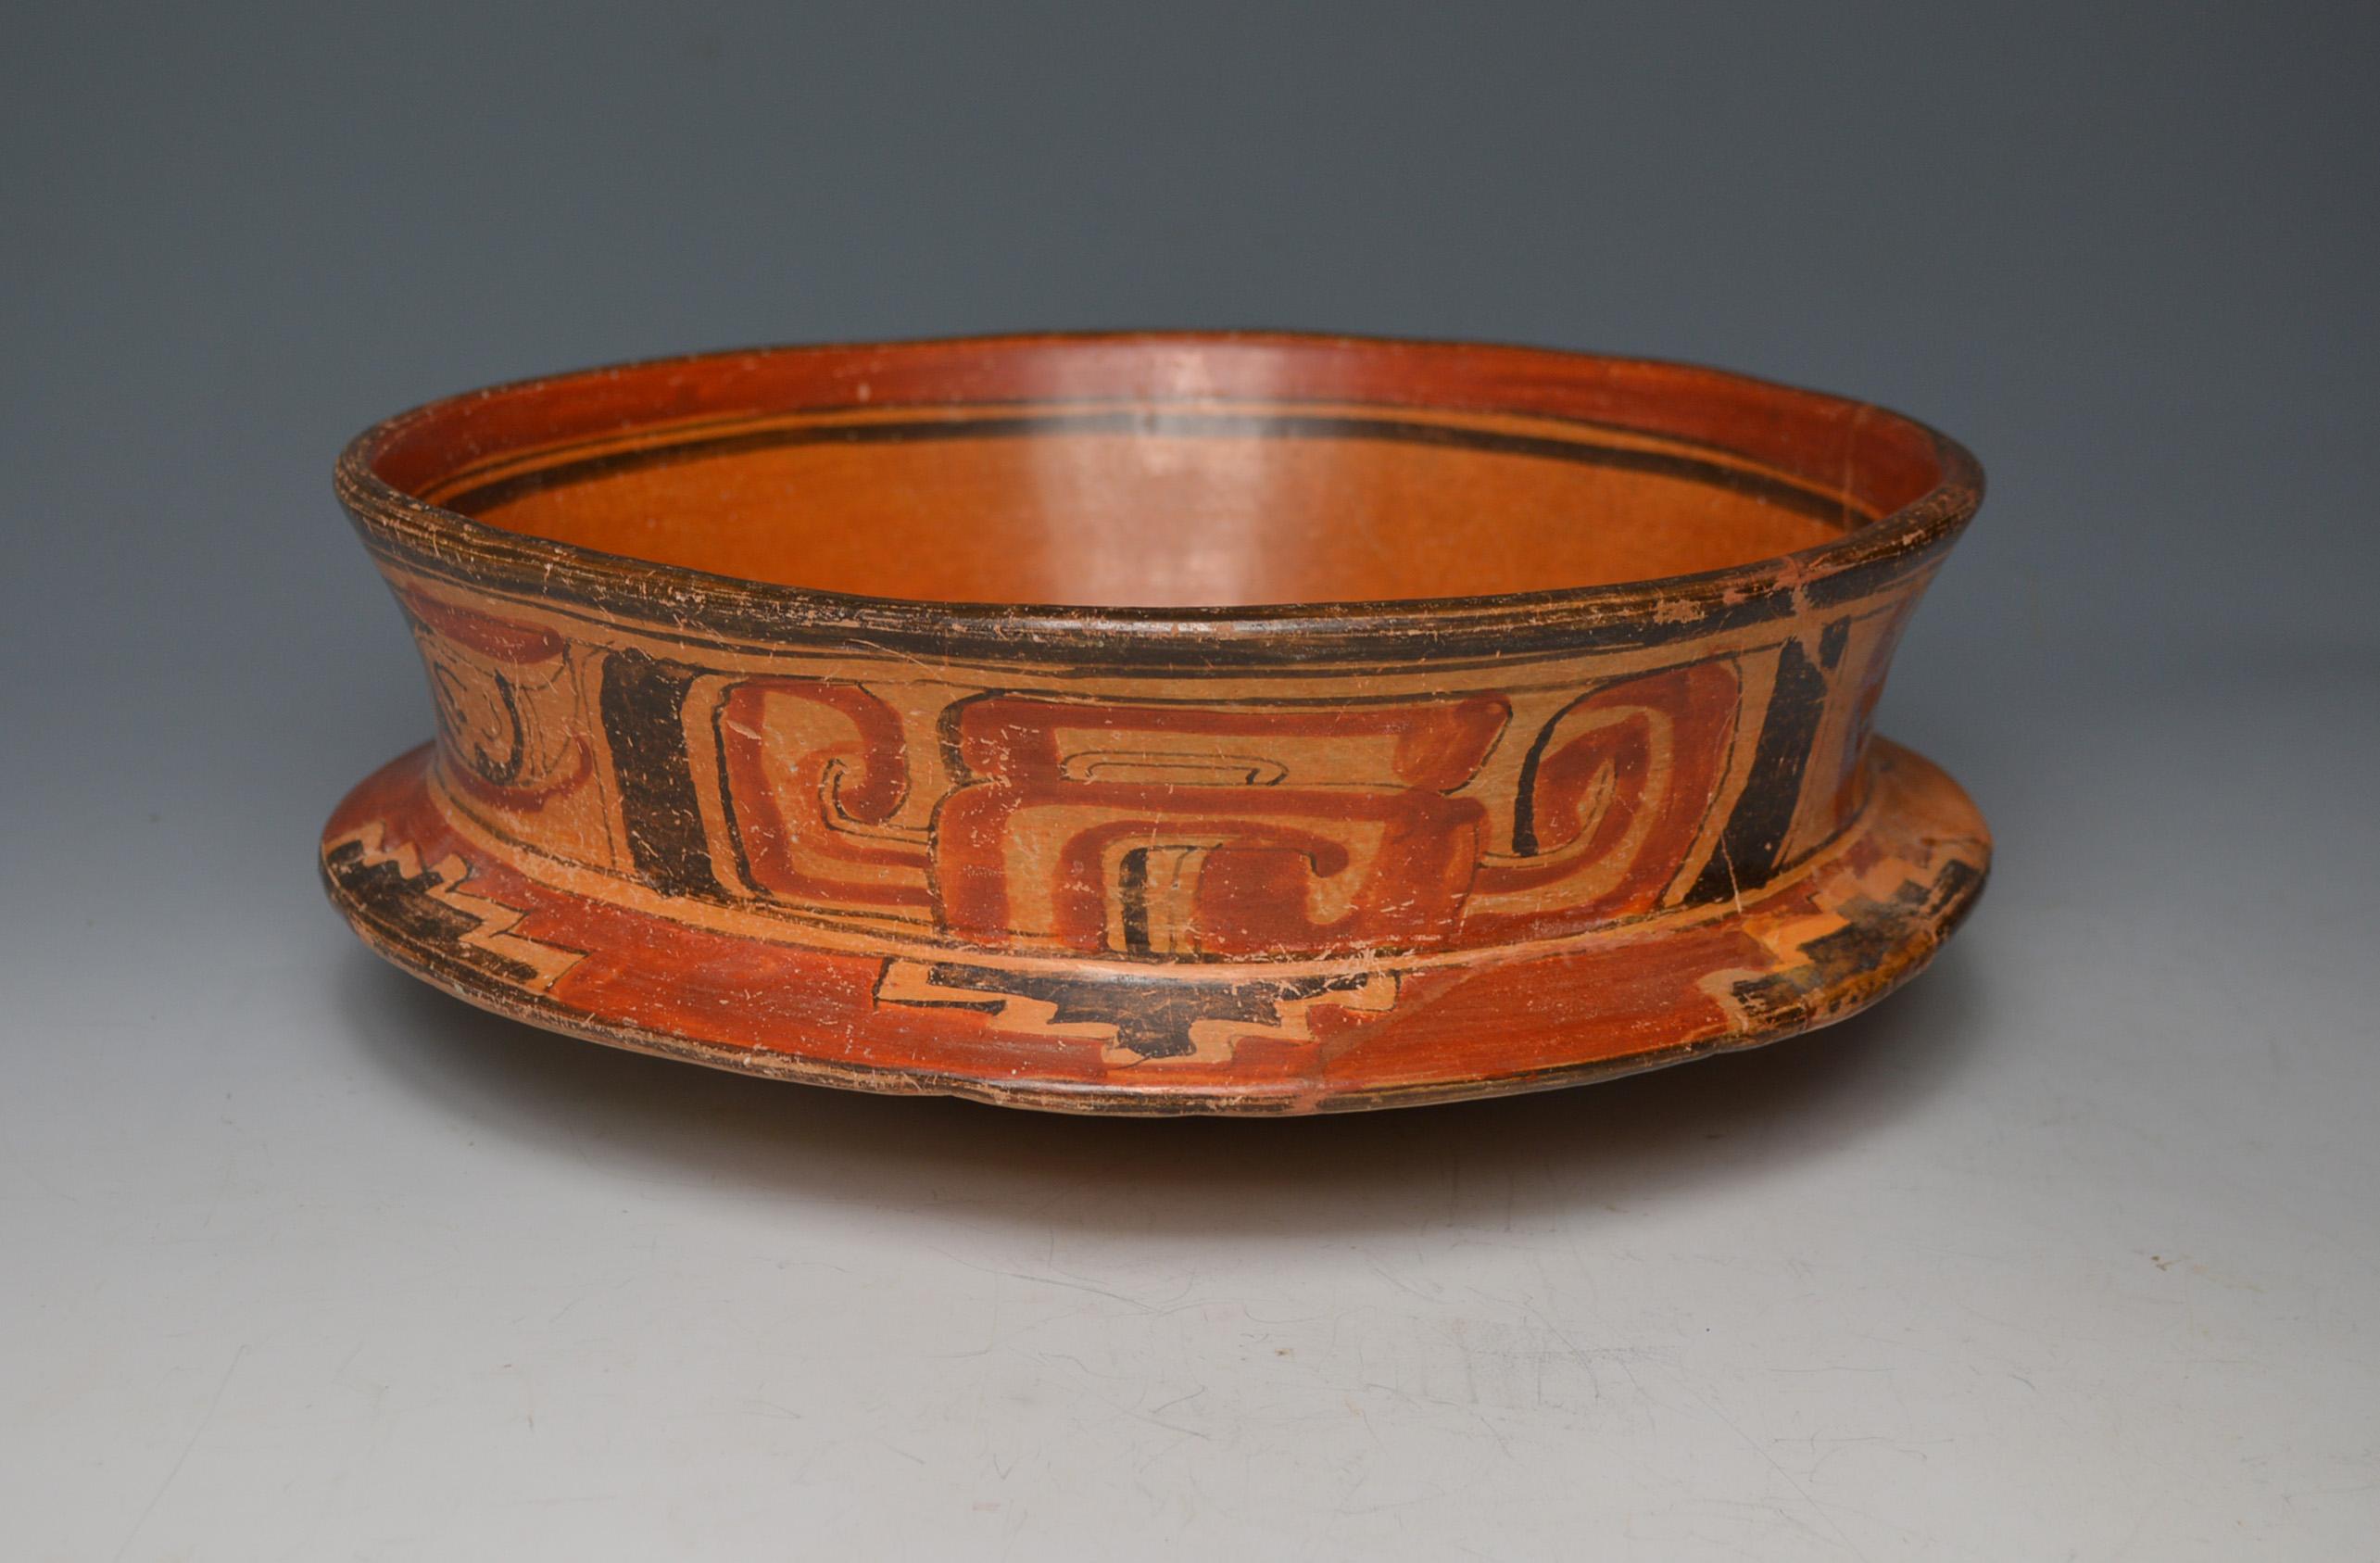 An impressive large Mayan Poly-chrome painted ceremonial pottery bowl
Guatemala/ central America late Classic period, circa A.D. 550-950,
A Beautiful large bowl of tapering circular form with bifurcated sides on a tapering slanted base,
painted